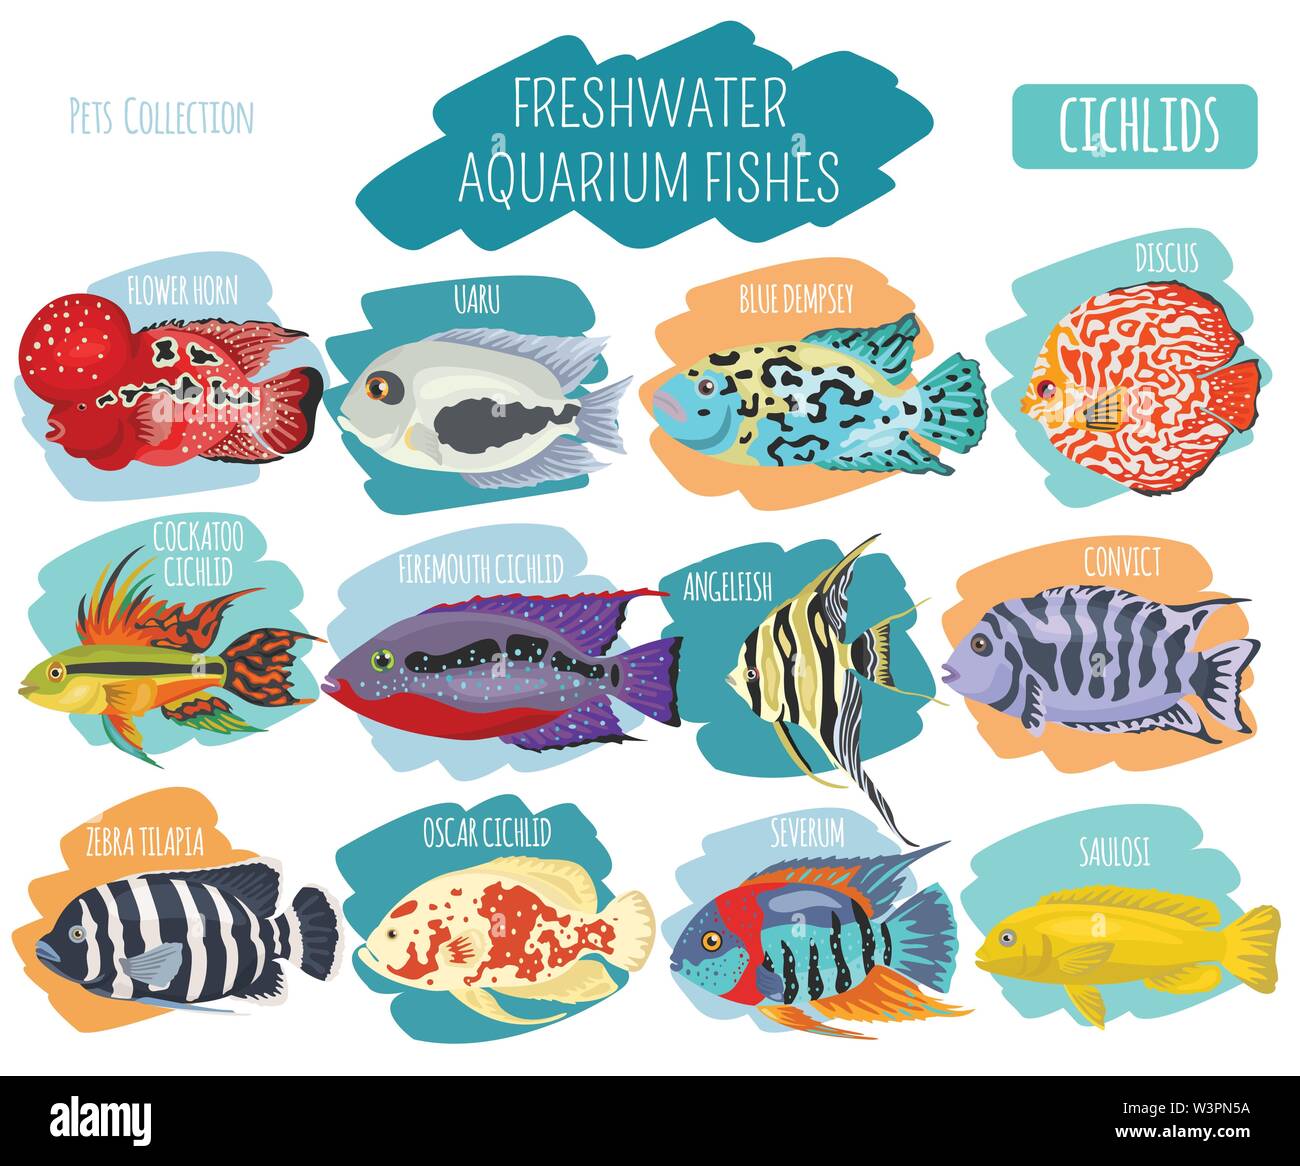 Freshwater aquarium fishes breeds icon set flat style isolated on white. Cichlids. Create own infographic about pets. Vector illustration Stock Vector